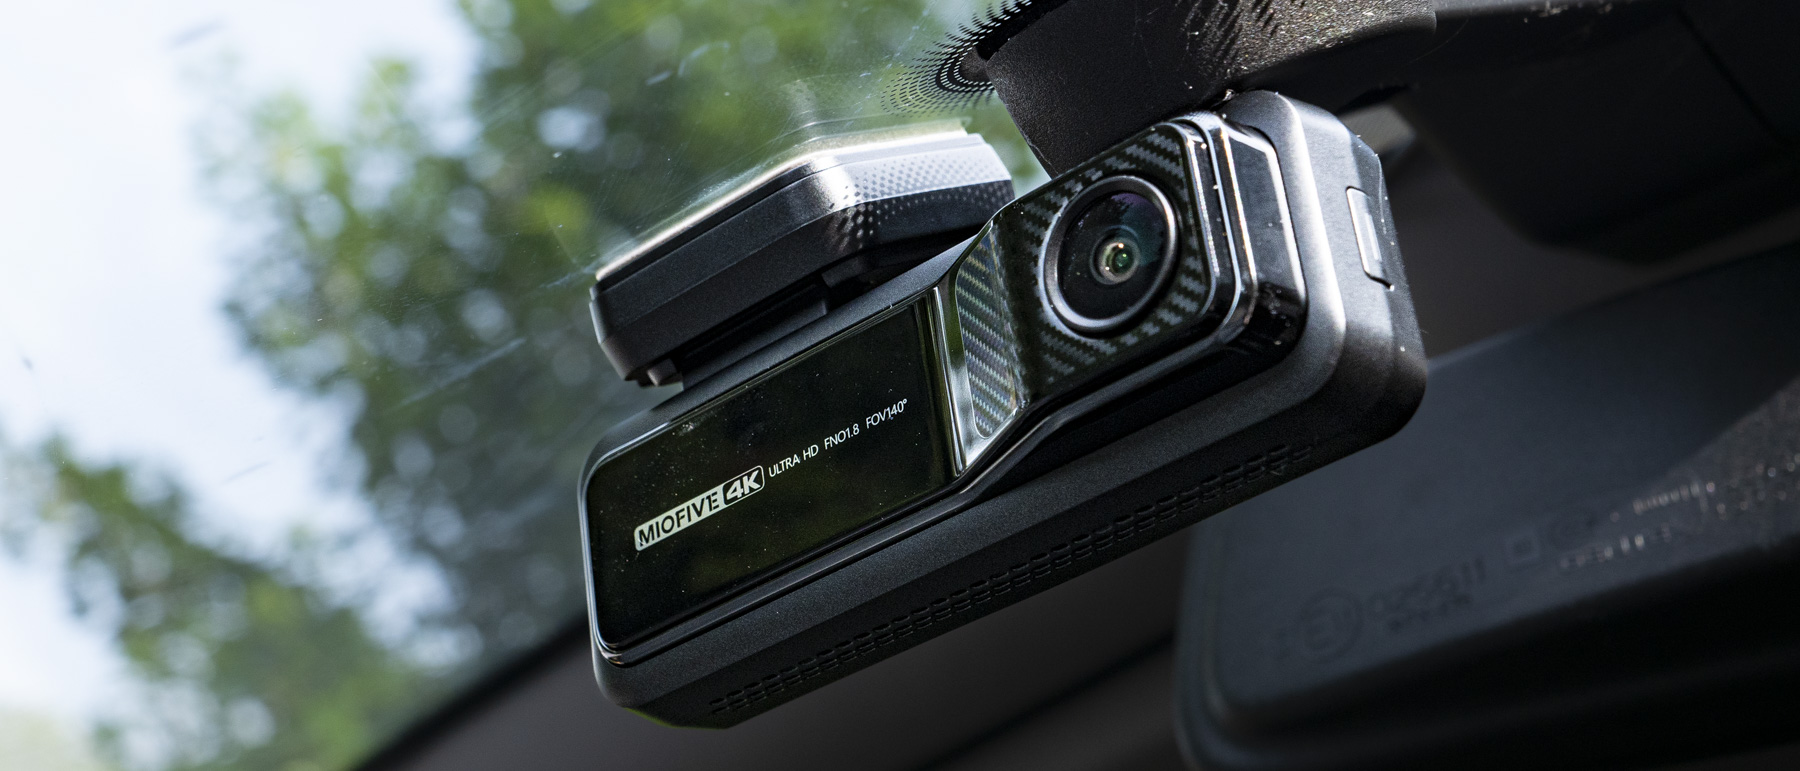 Miofive Dual Dash Cam review: slim, smart and powerful